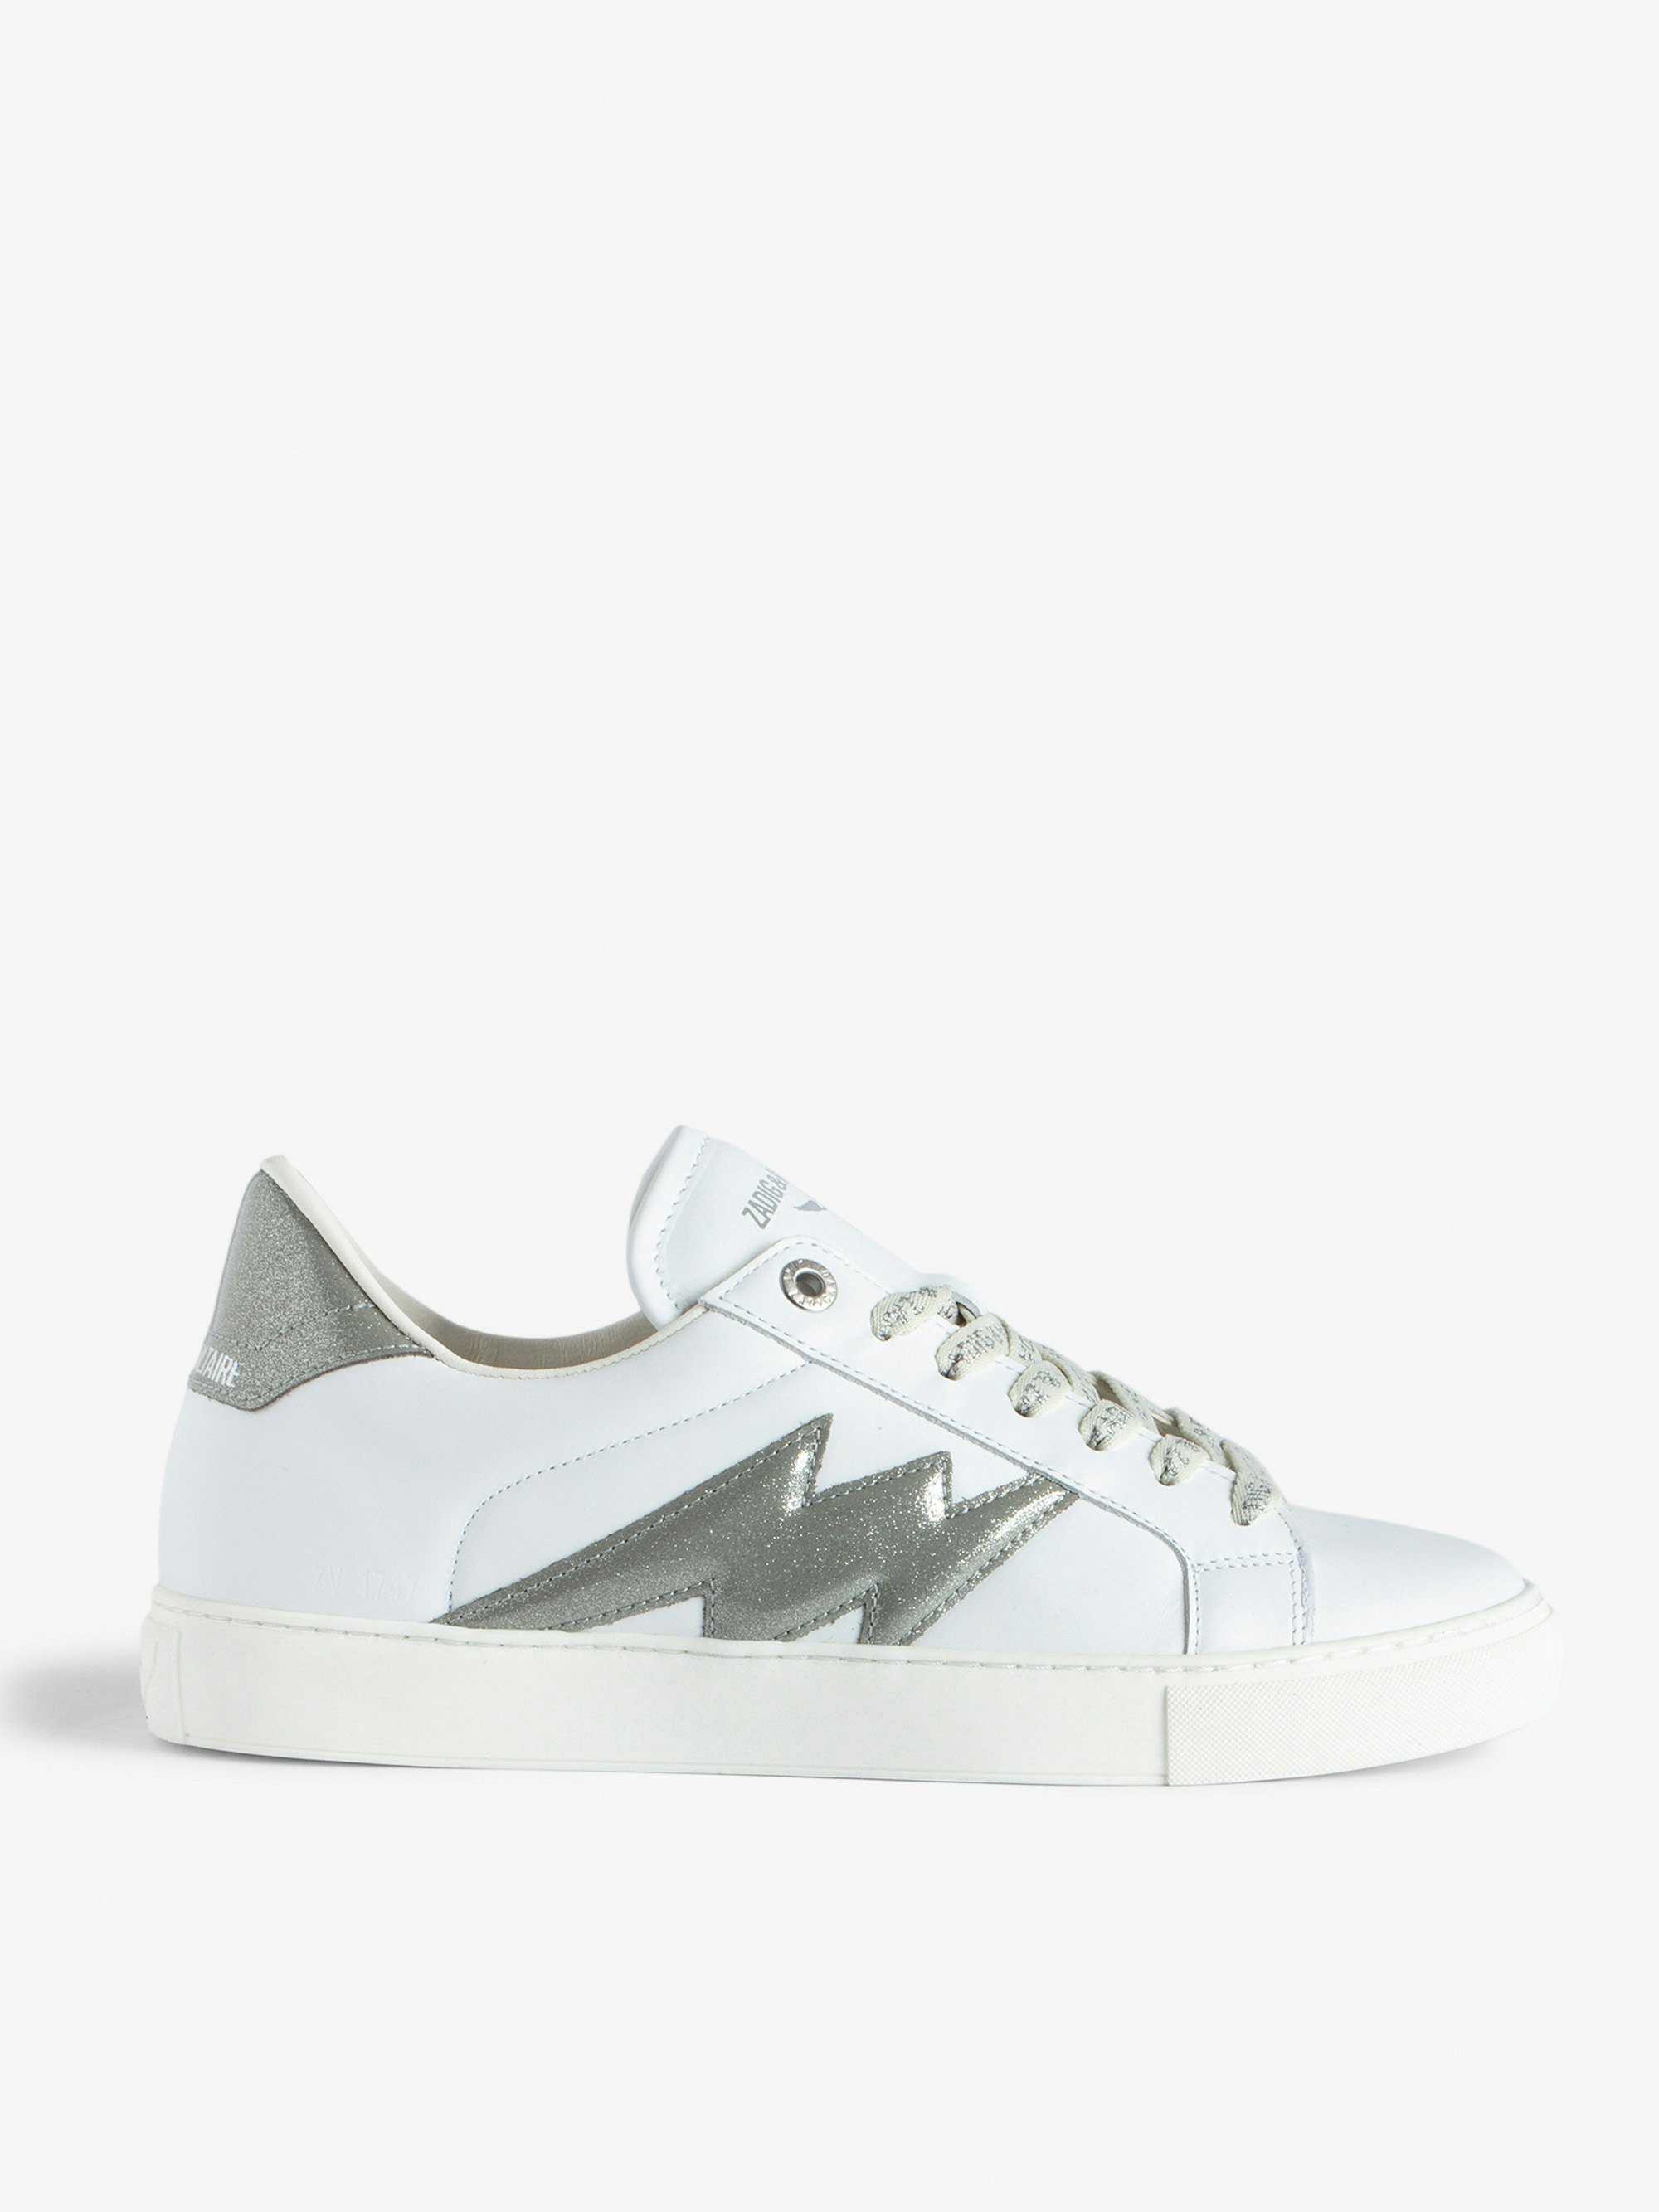 ZV1747 La Flash Low-Top Sneakers - Women’s white smooth leather low-top trainers with lightning bolt panels and silver glitter reinforcement.